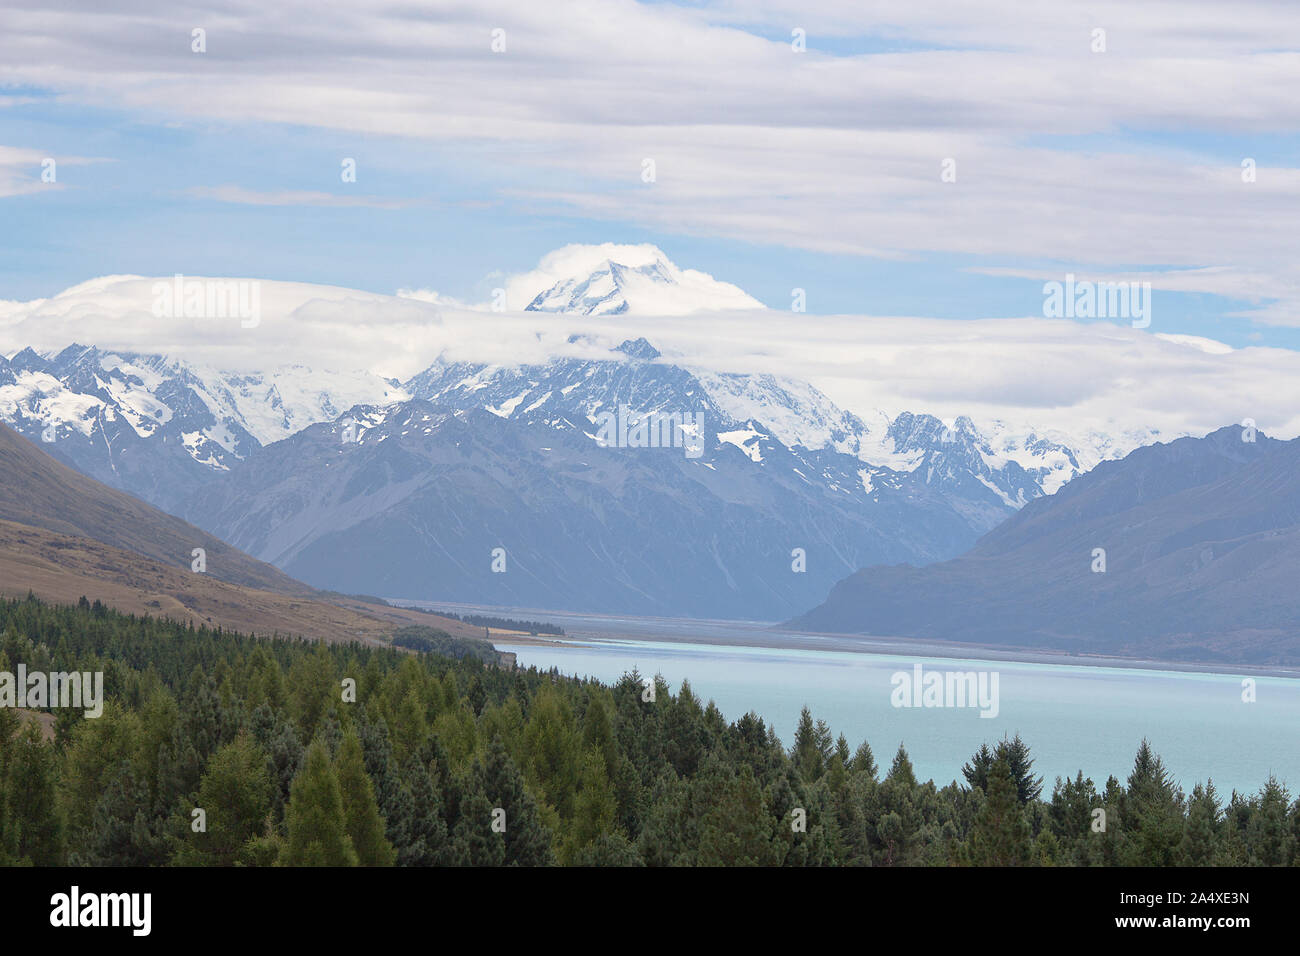 A view of Mount Cook (Aoraki) from near Lake Pukaki on a clear day. Stock Photo